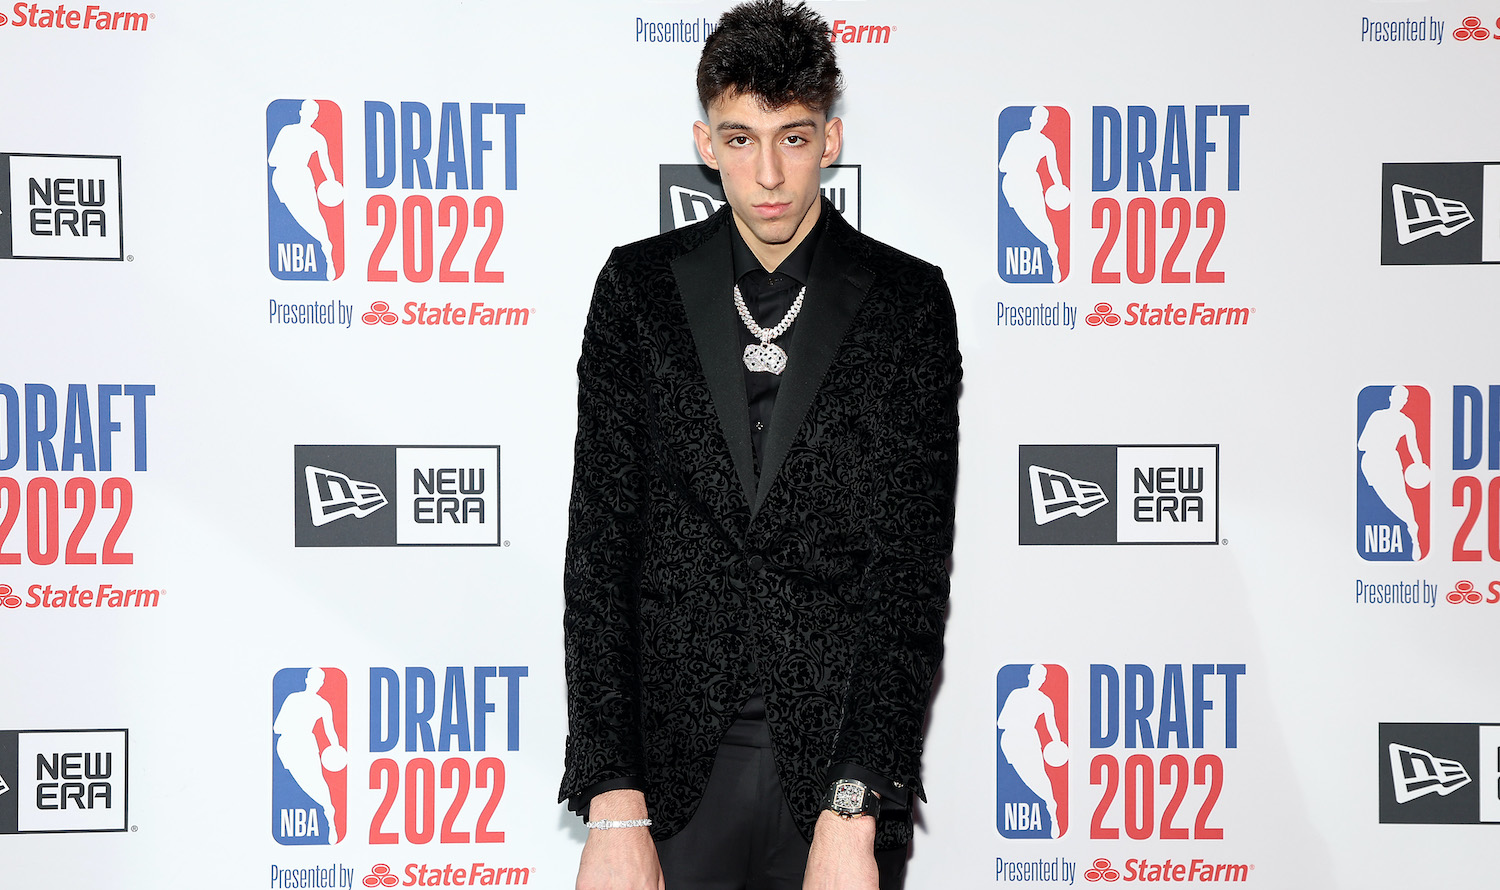 NEW YORK, NEW YORK - JUNE 23: Chet Holmgren poses for photos on the red carpet during the 2022 NBA Draft at Barclays Center on June 23, 2022 in New York City. NOTE TO USER: User expressly acknowledges and agrees that, by downloading and or using this photograph, User is consenting to the terms and conditions of the Getty Images License Agreement. (Photo by Arturo Holmes/Getty Images)